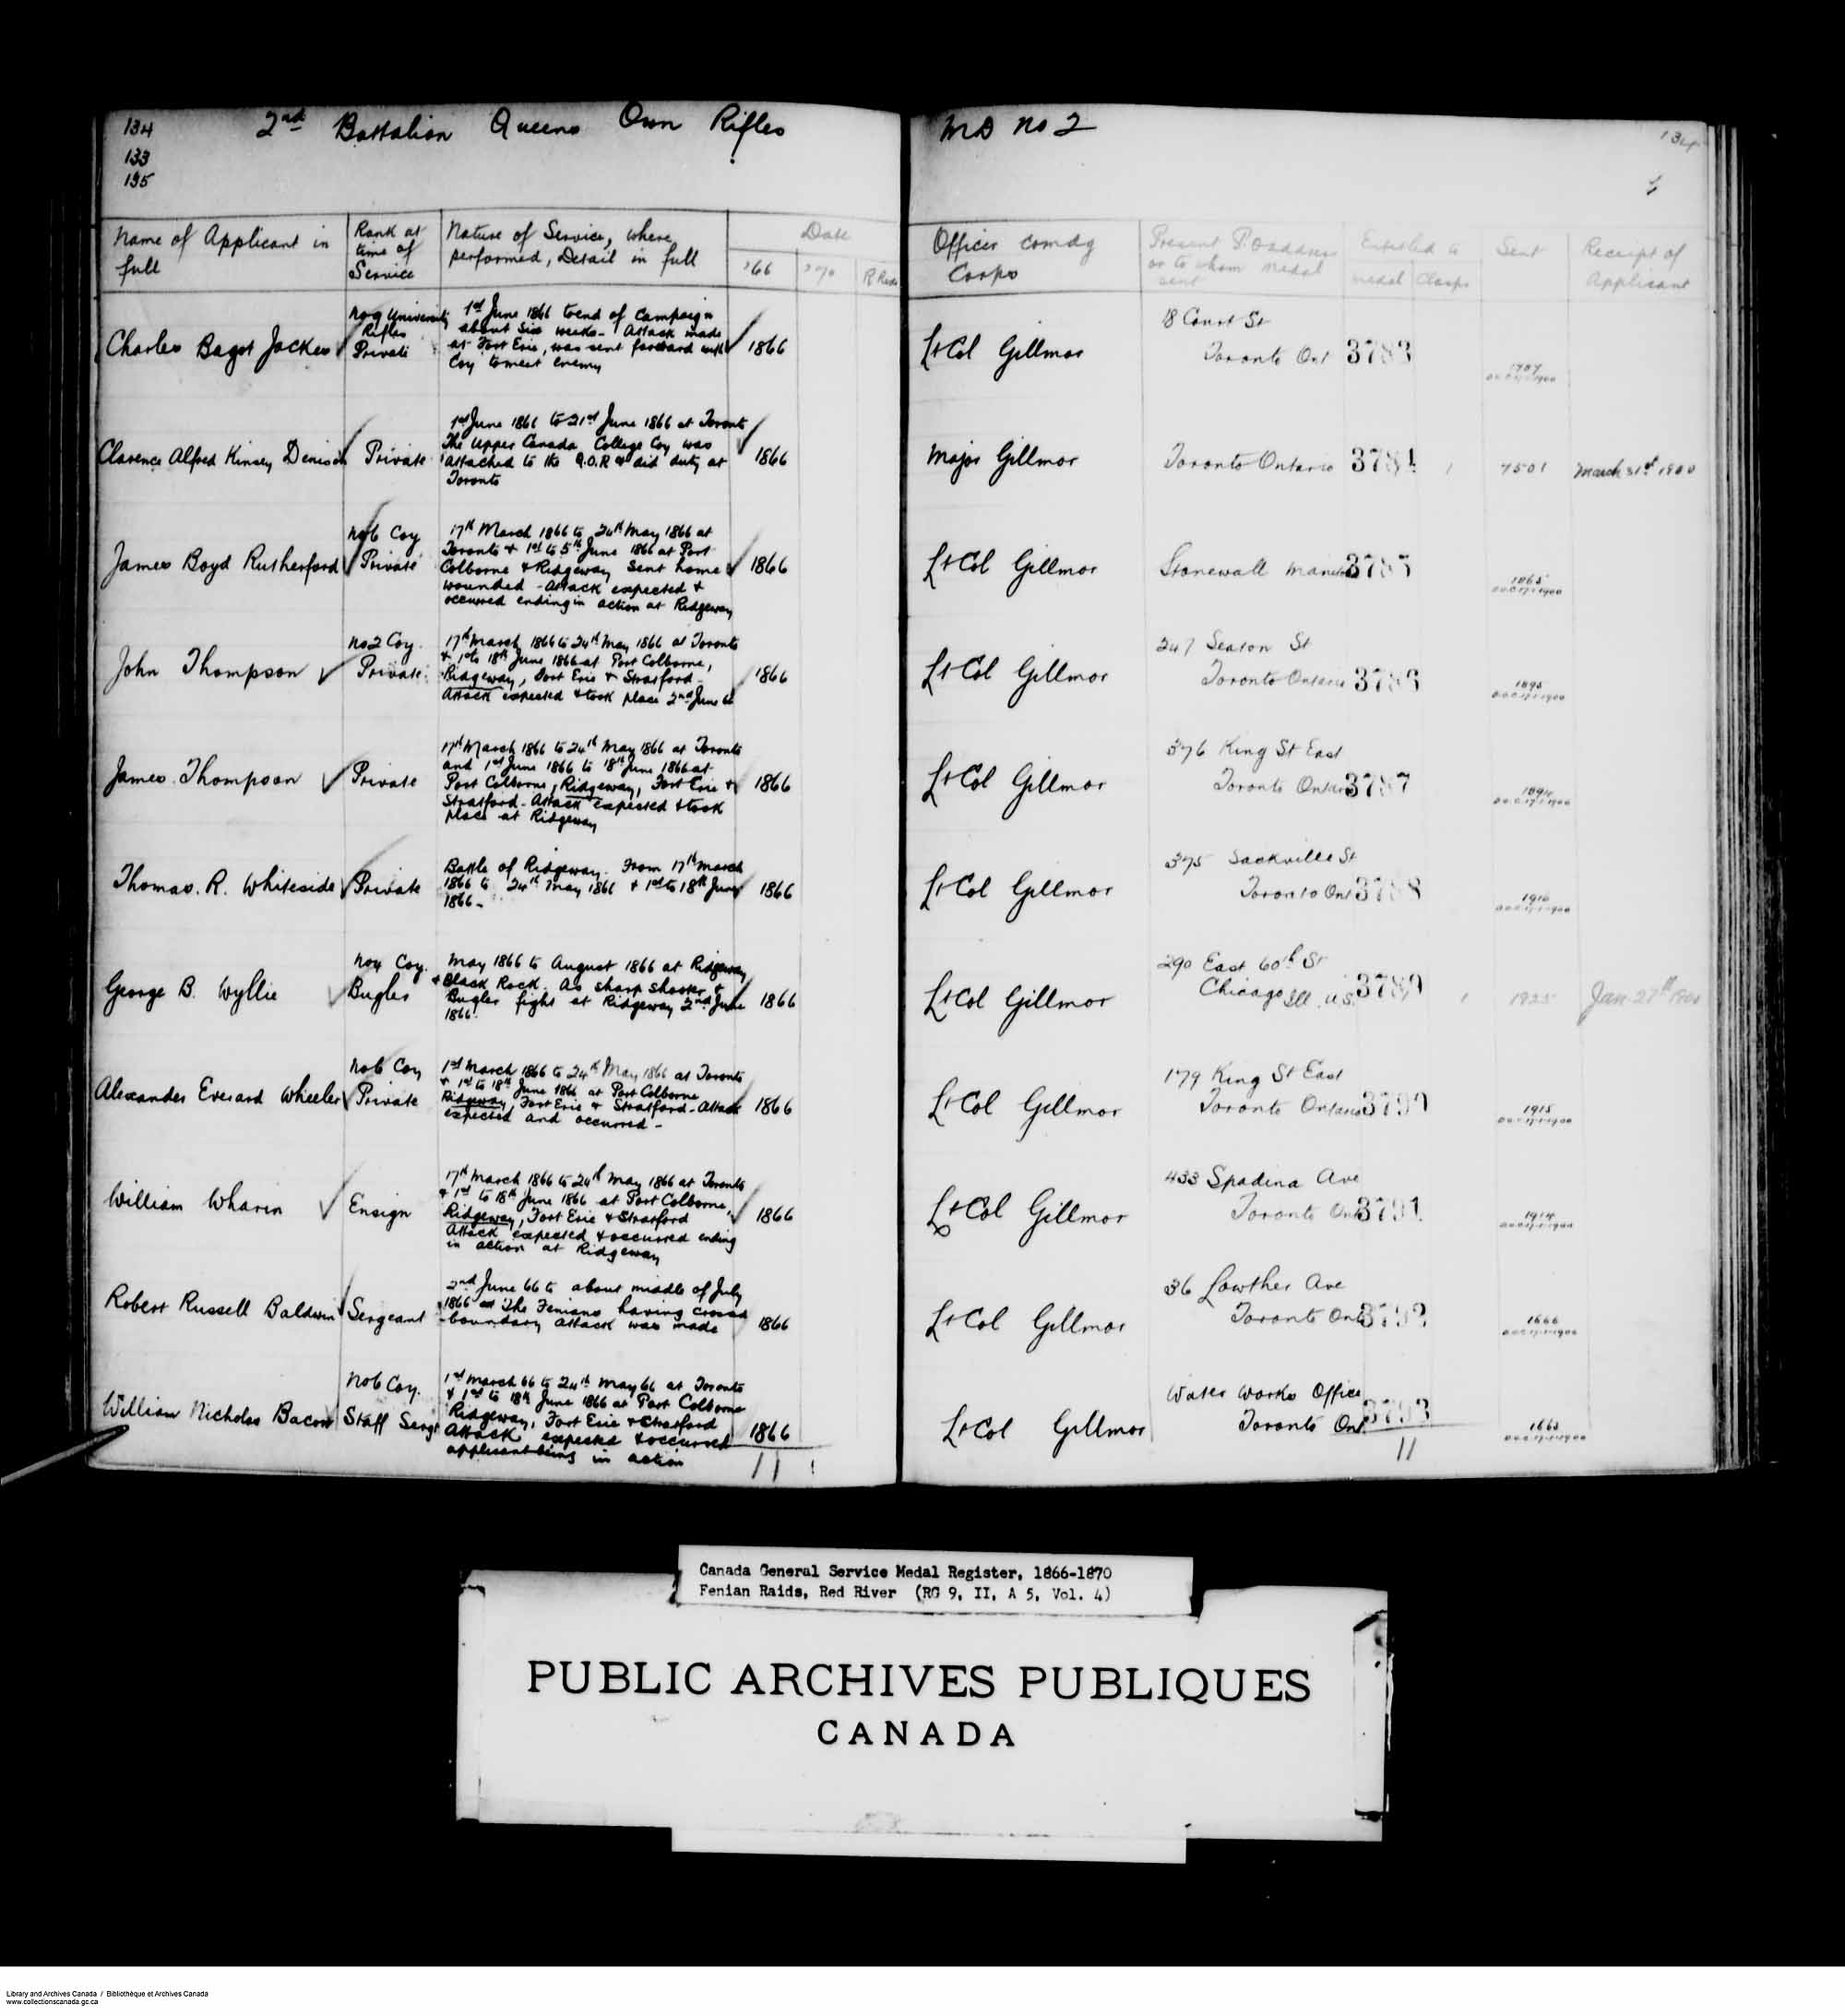 Digitized page of Medals, Honours and Awards for Image No.: e008681821